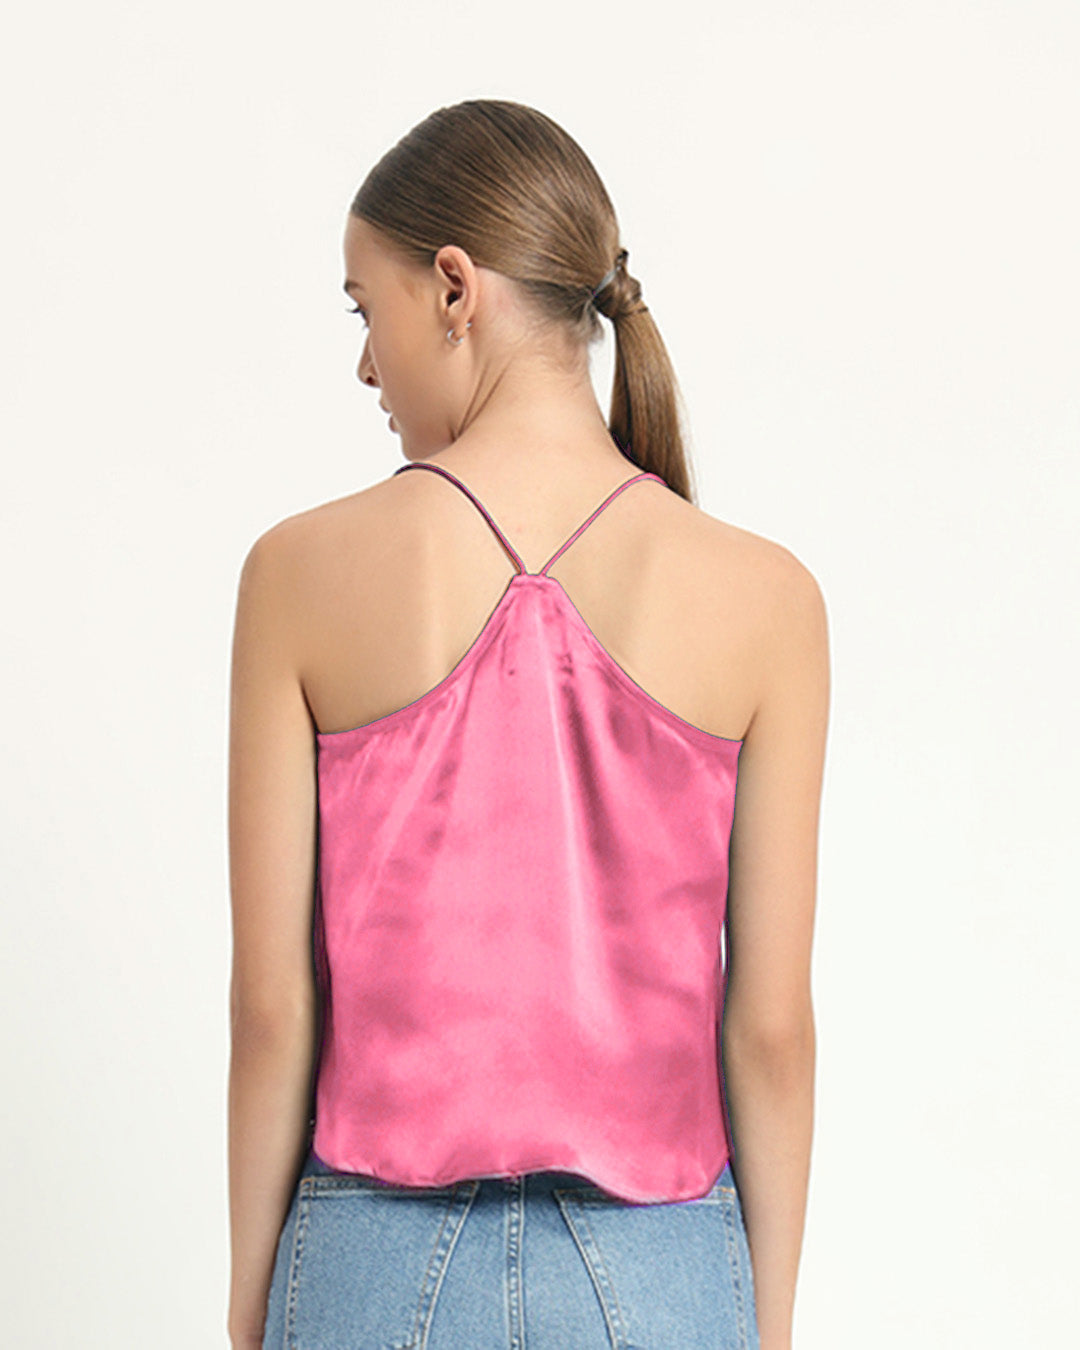 Satin Chic French Rose Camisole